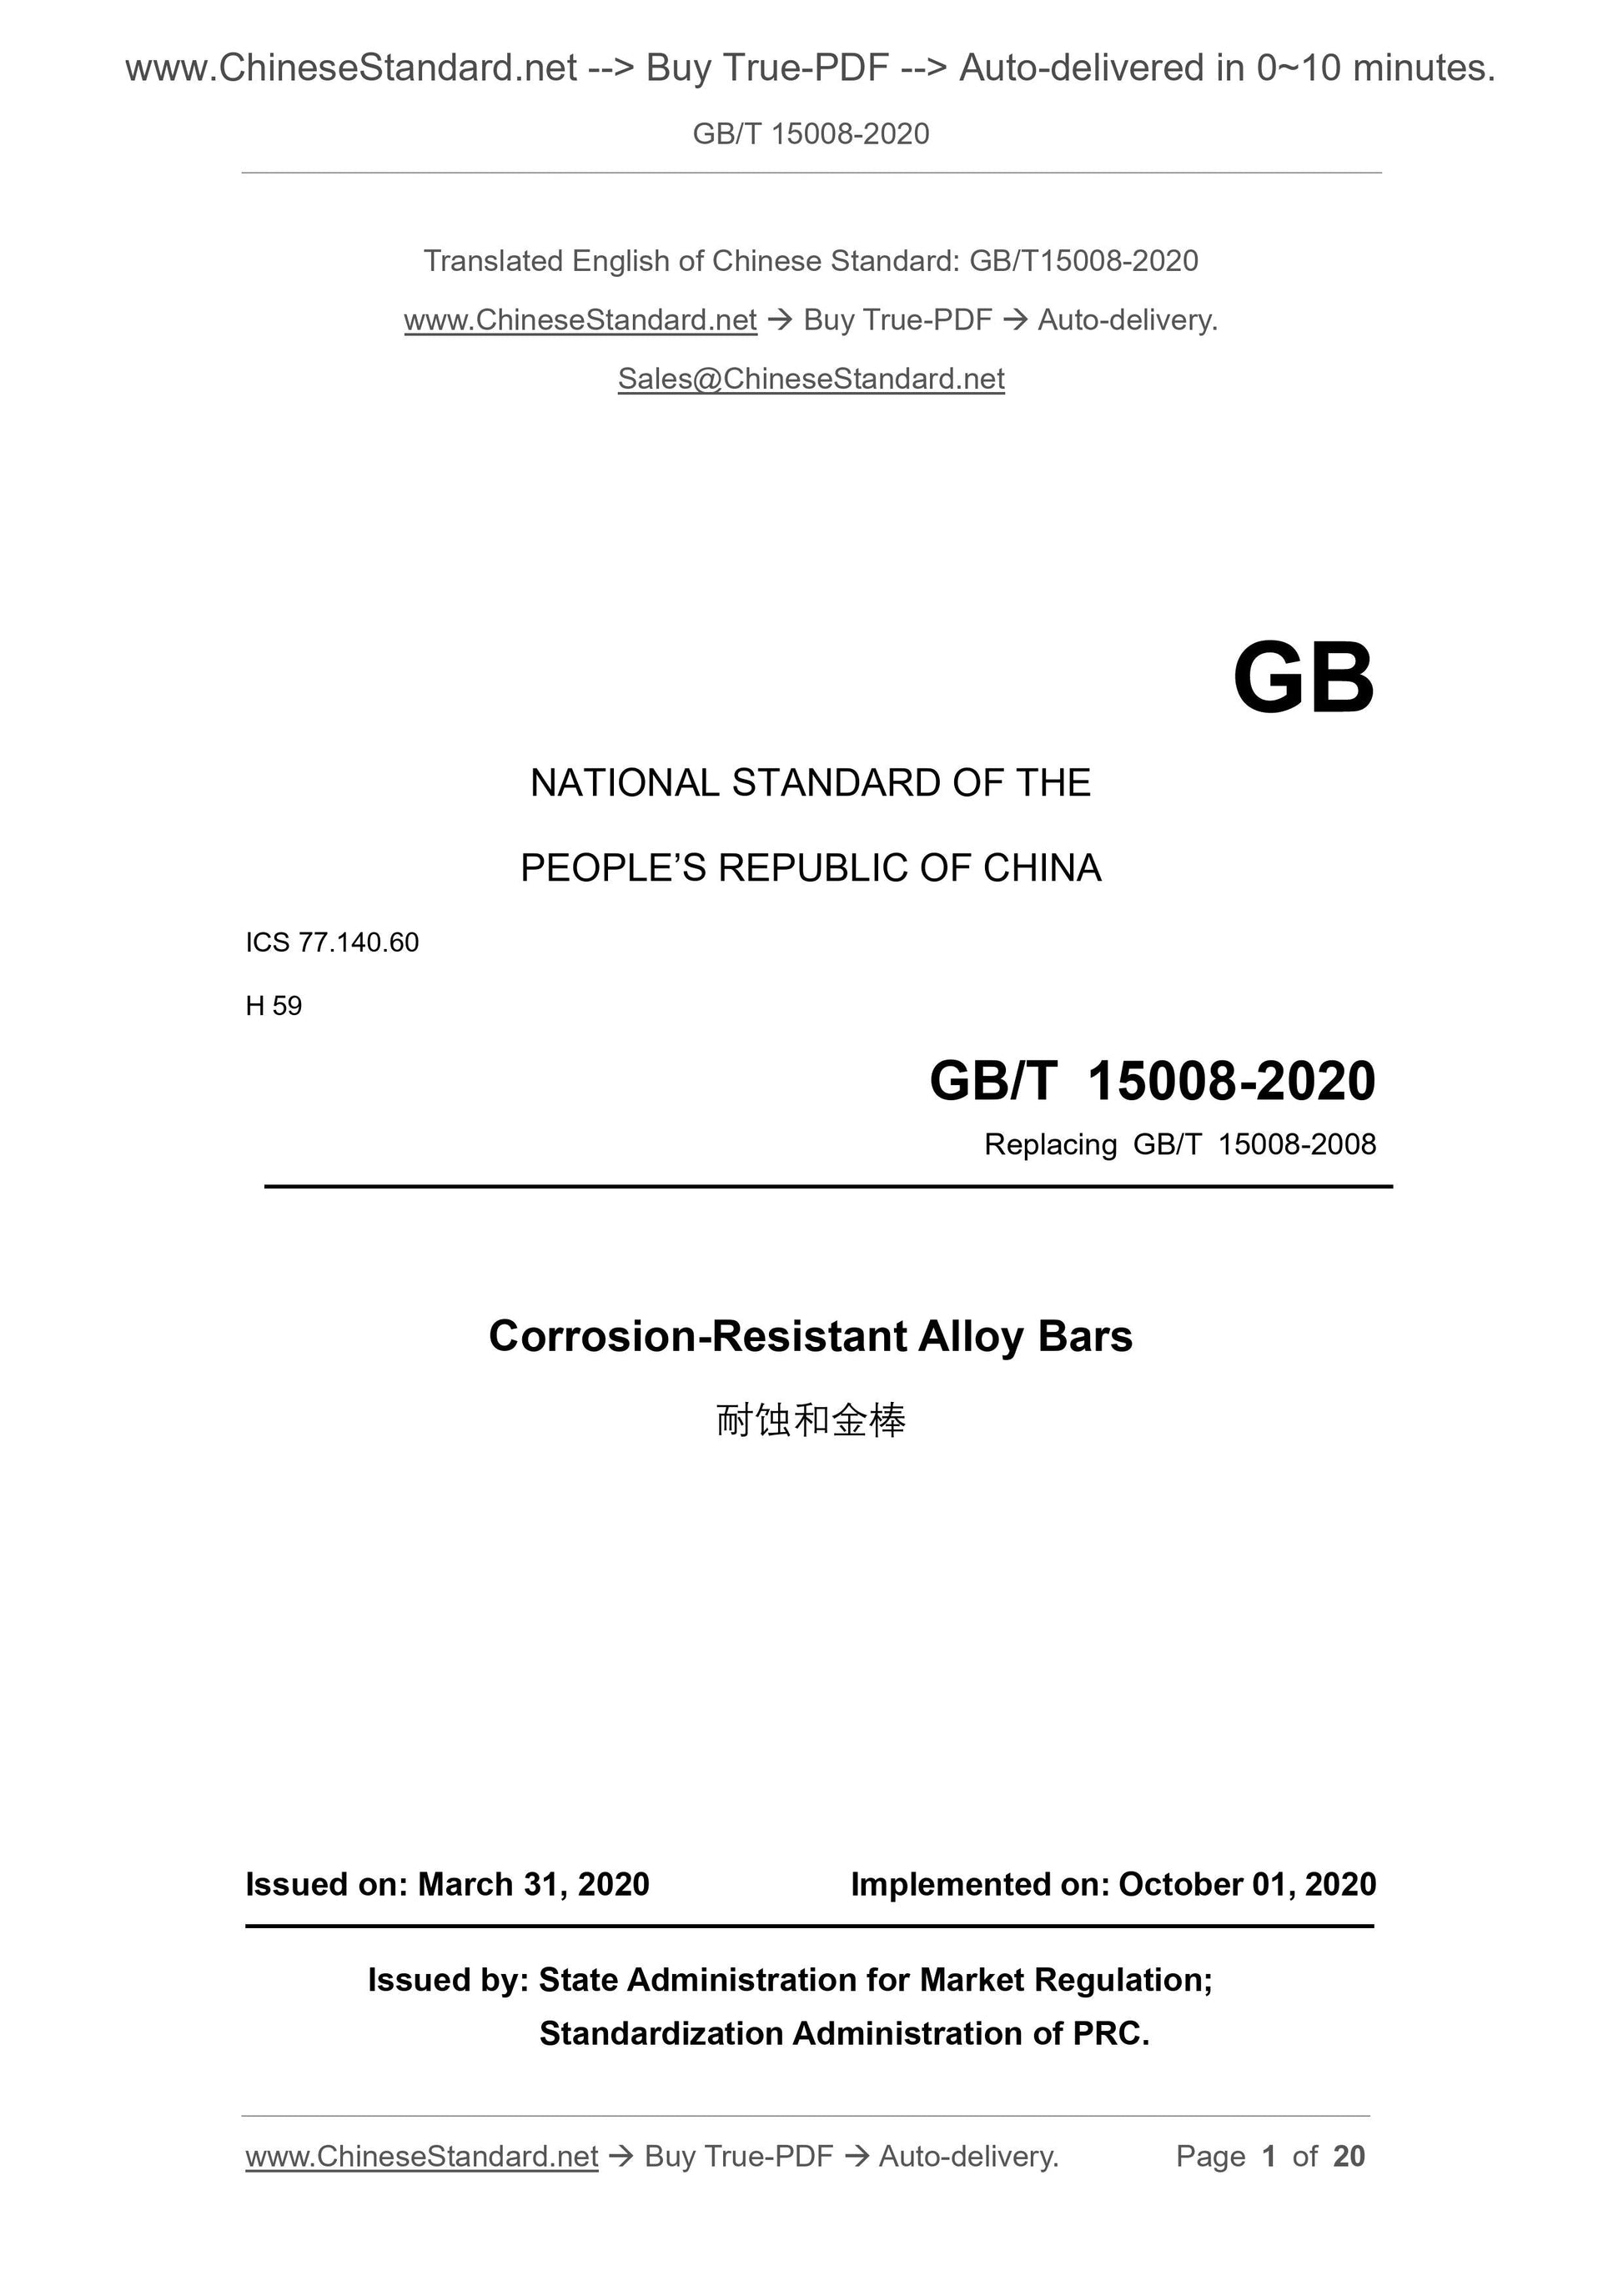 GB/T 15008-2020 Page 1